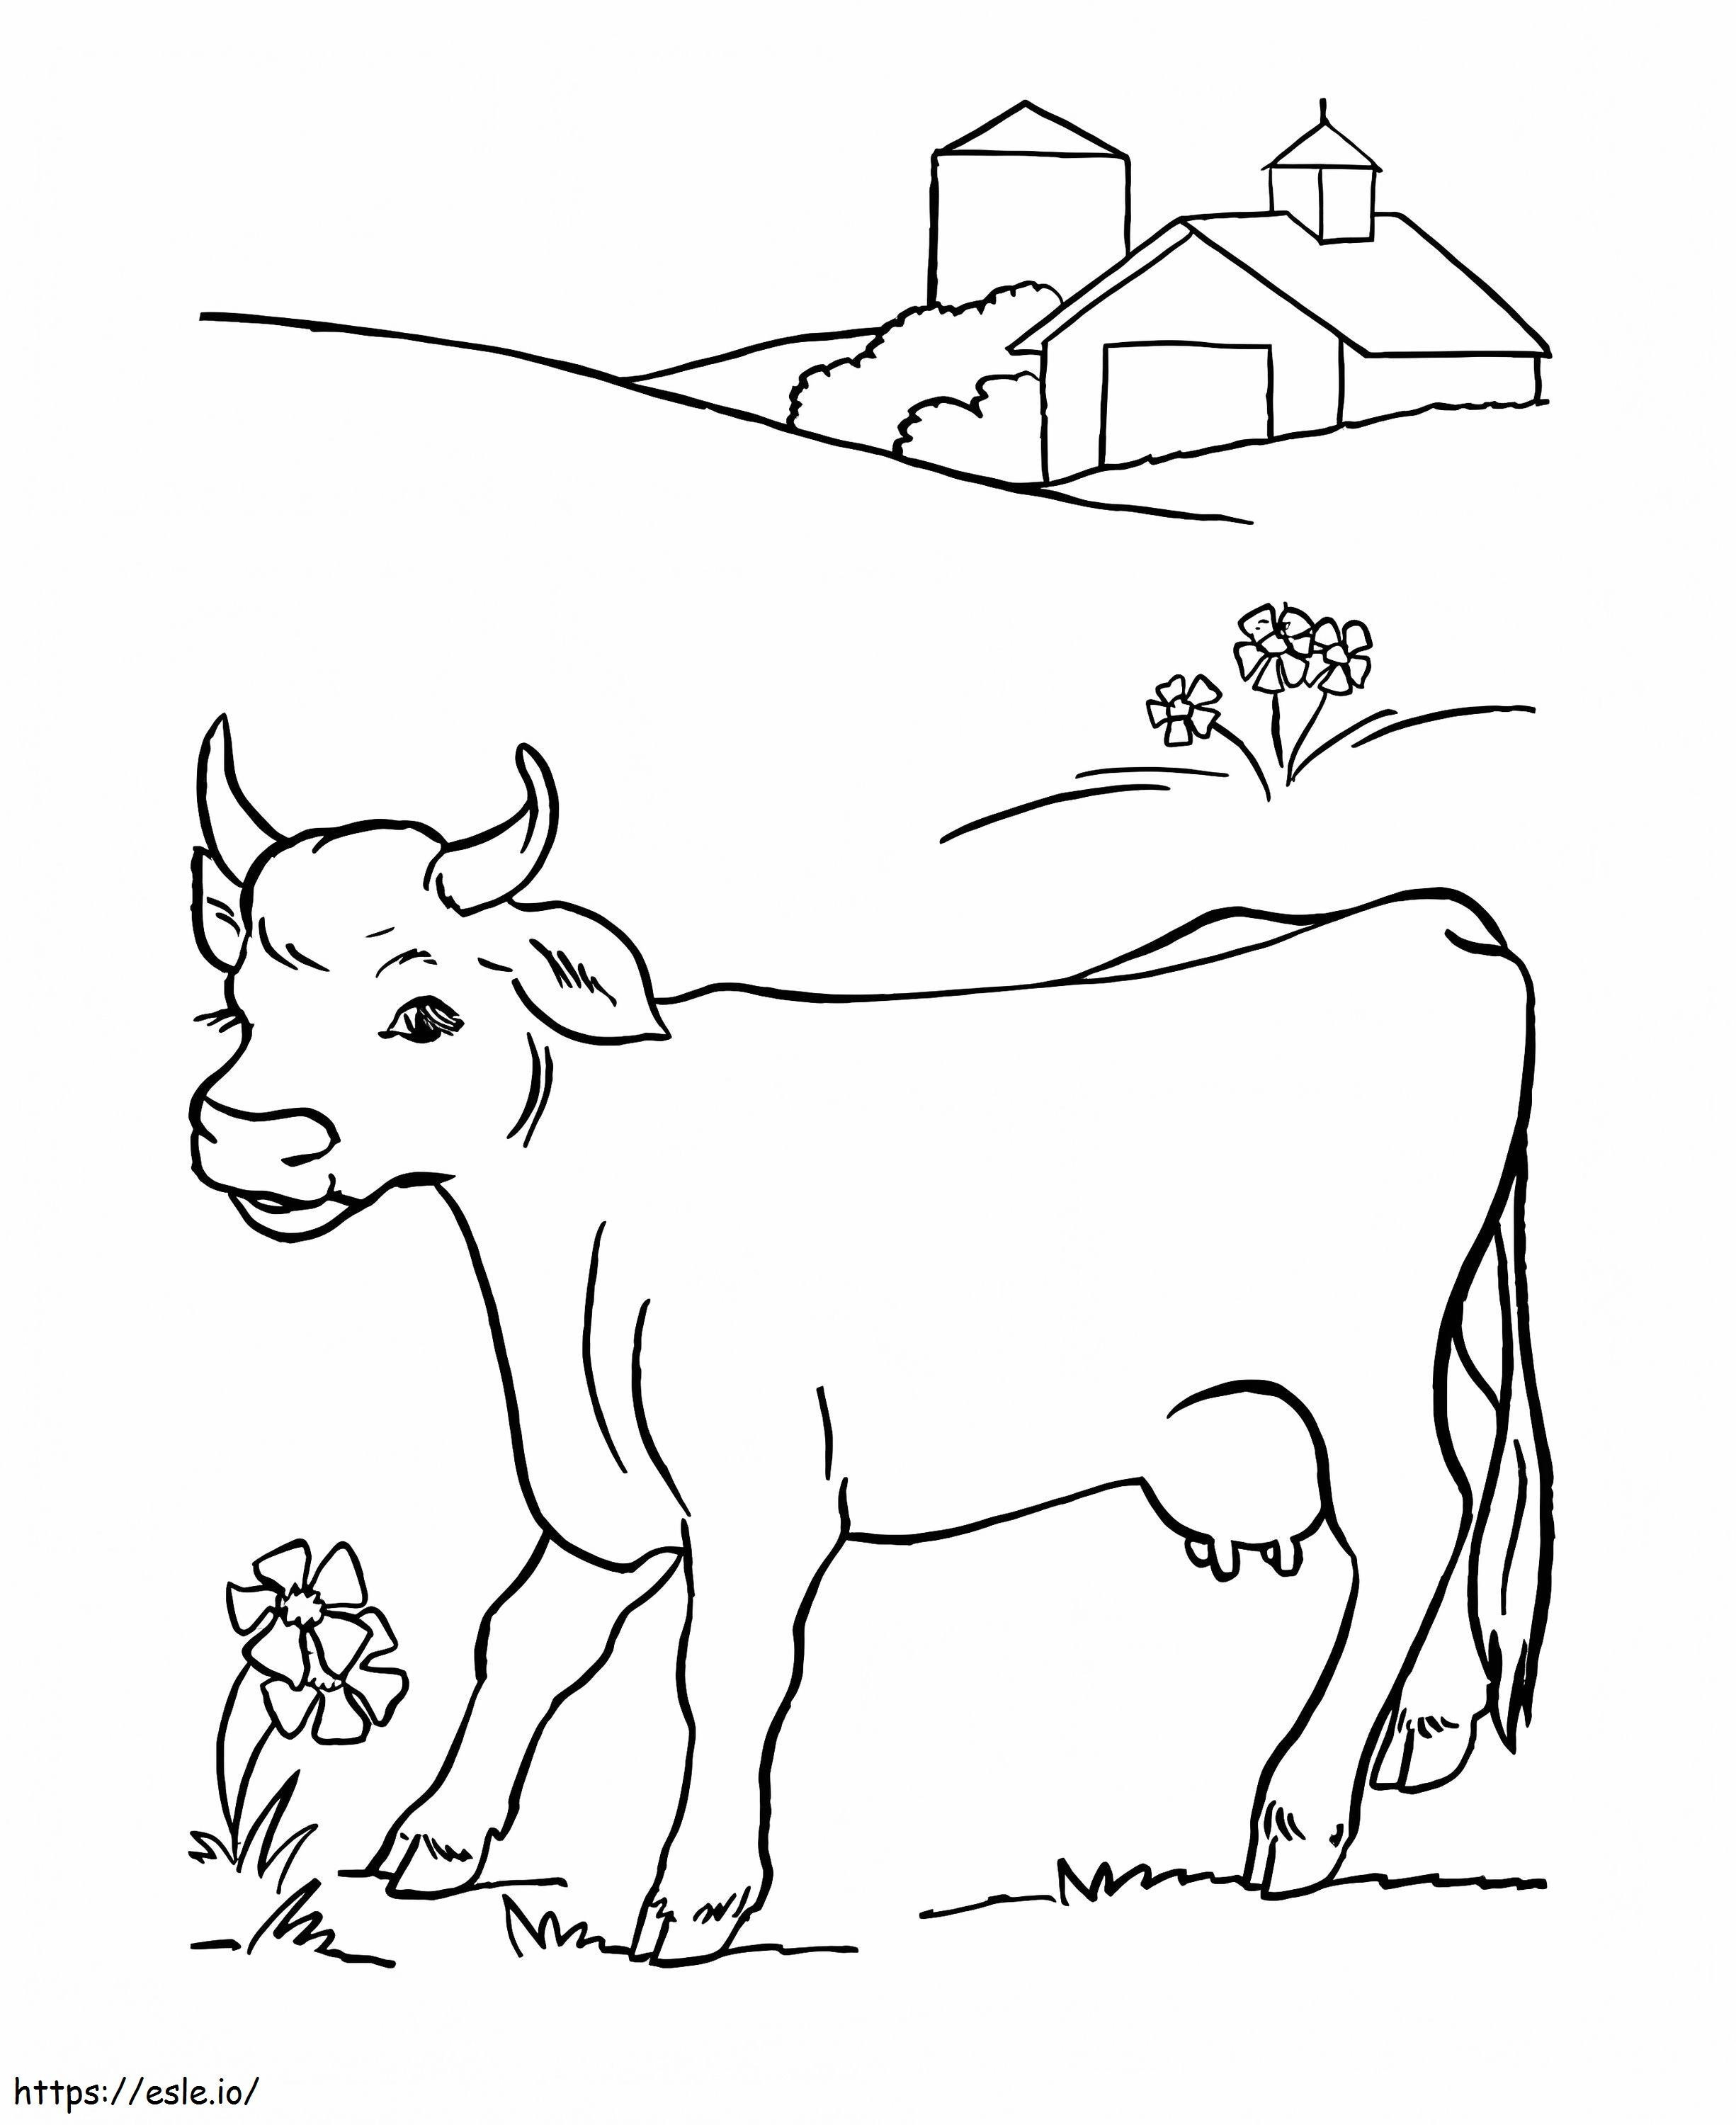 Cow 11 coloring page